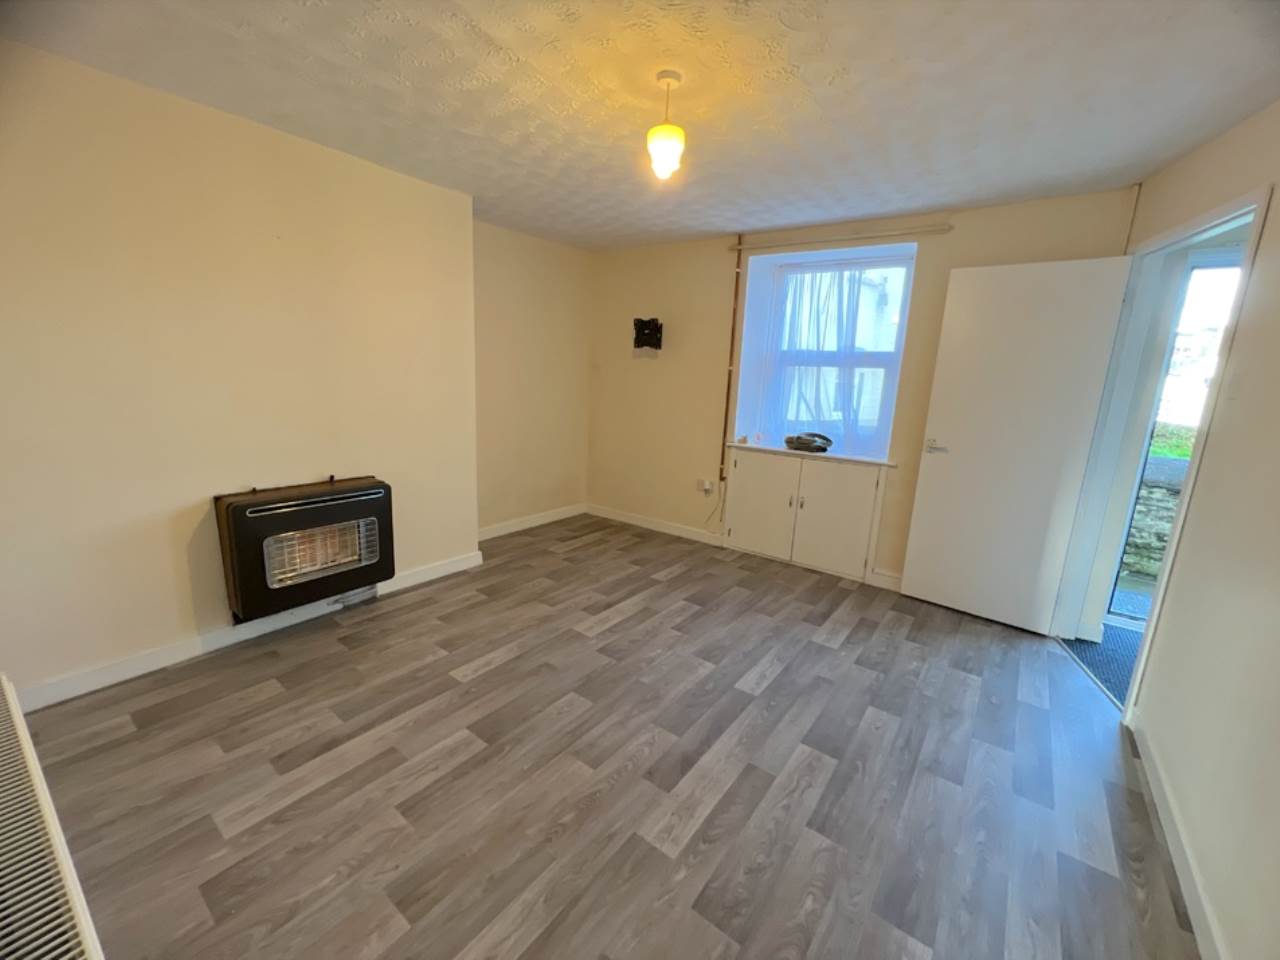 2 bed house for sale in Crynfryn Row, Aberystwyth  - Property Image 2